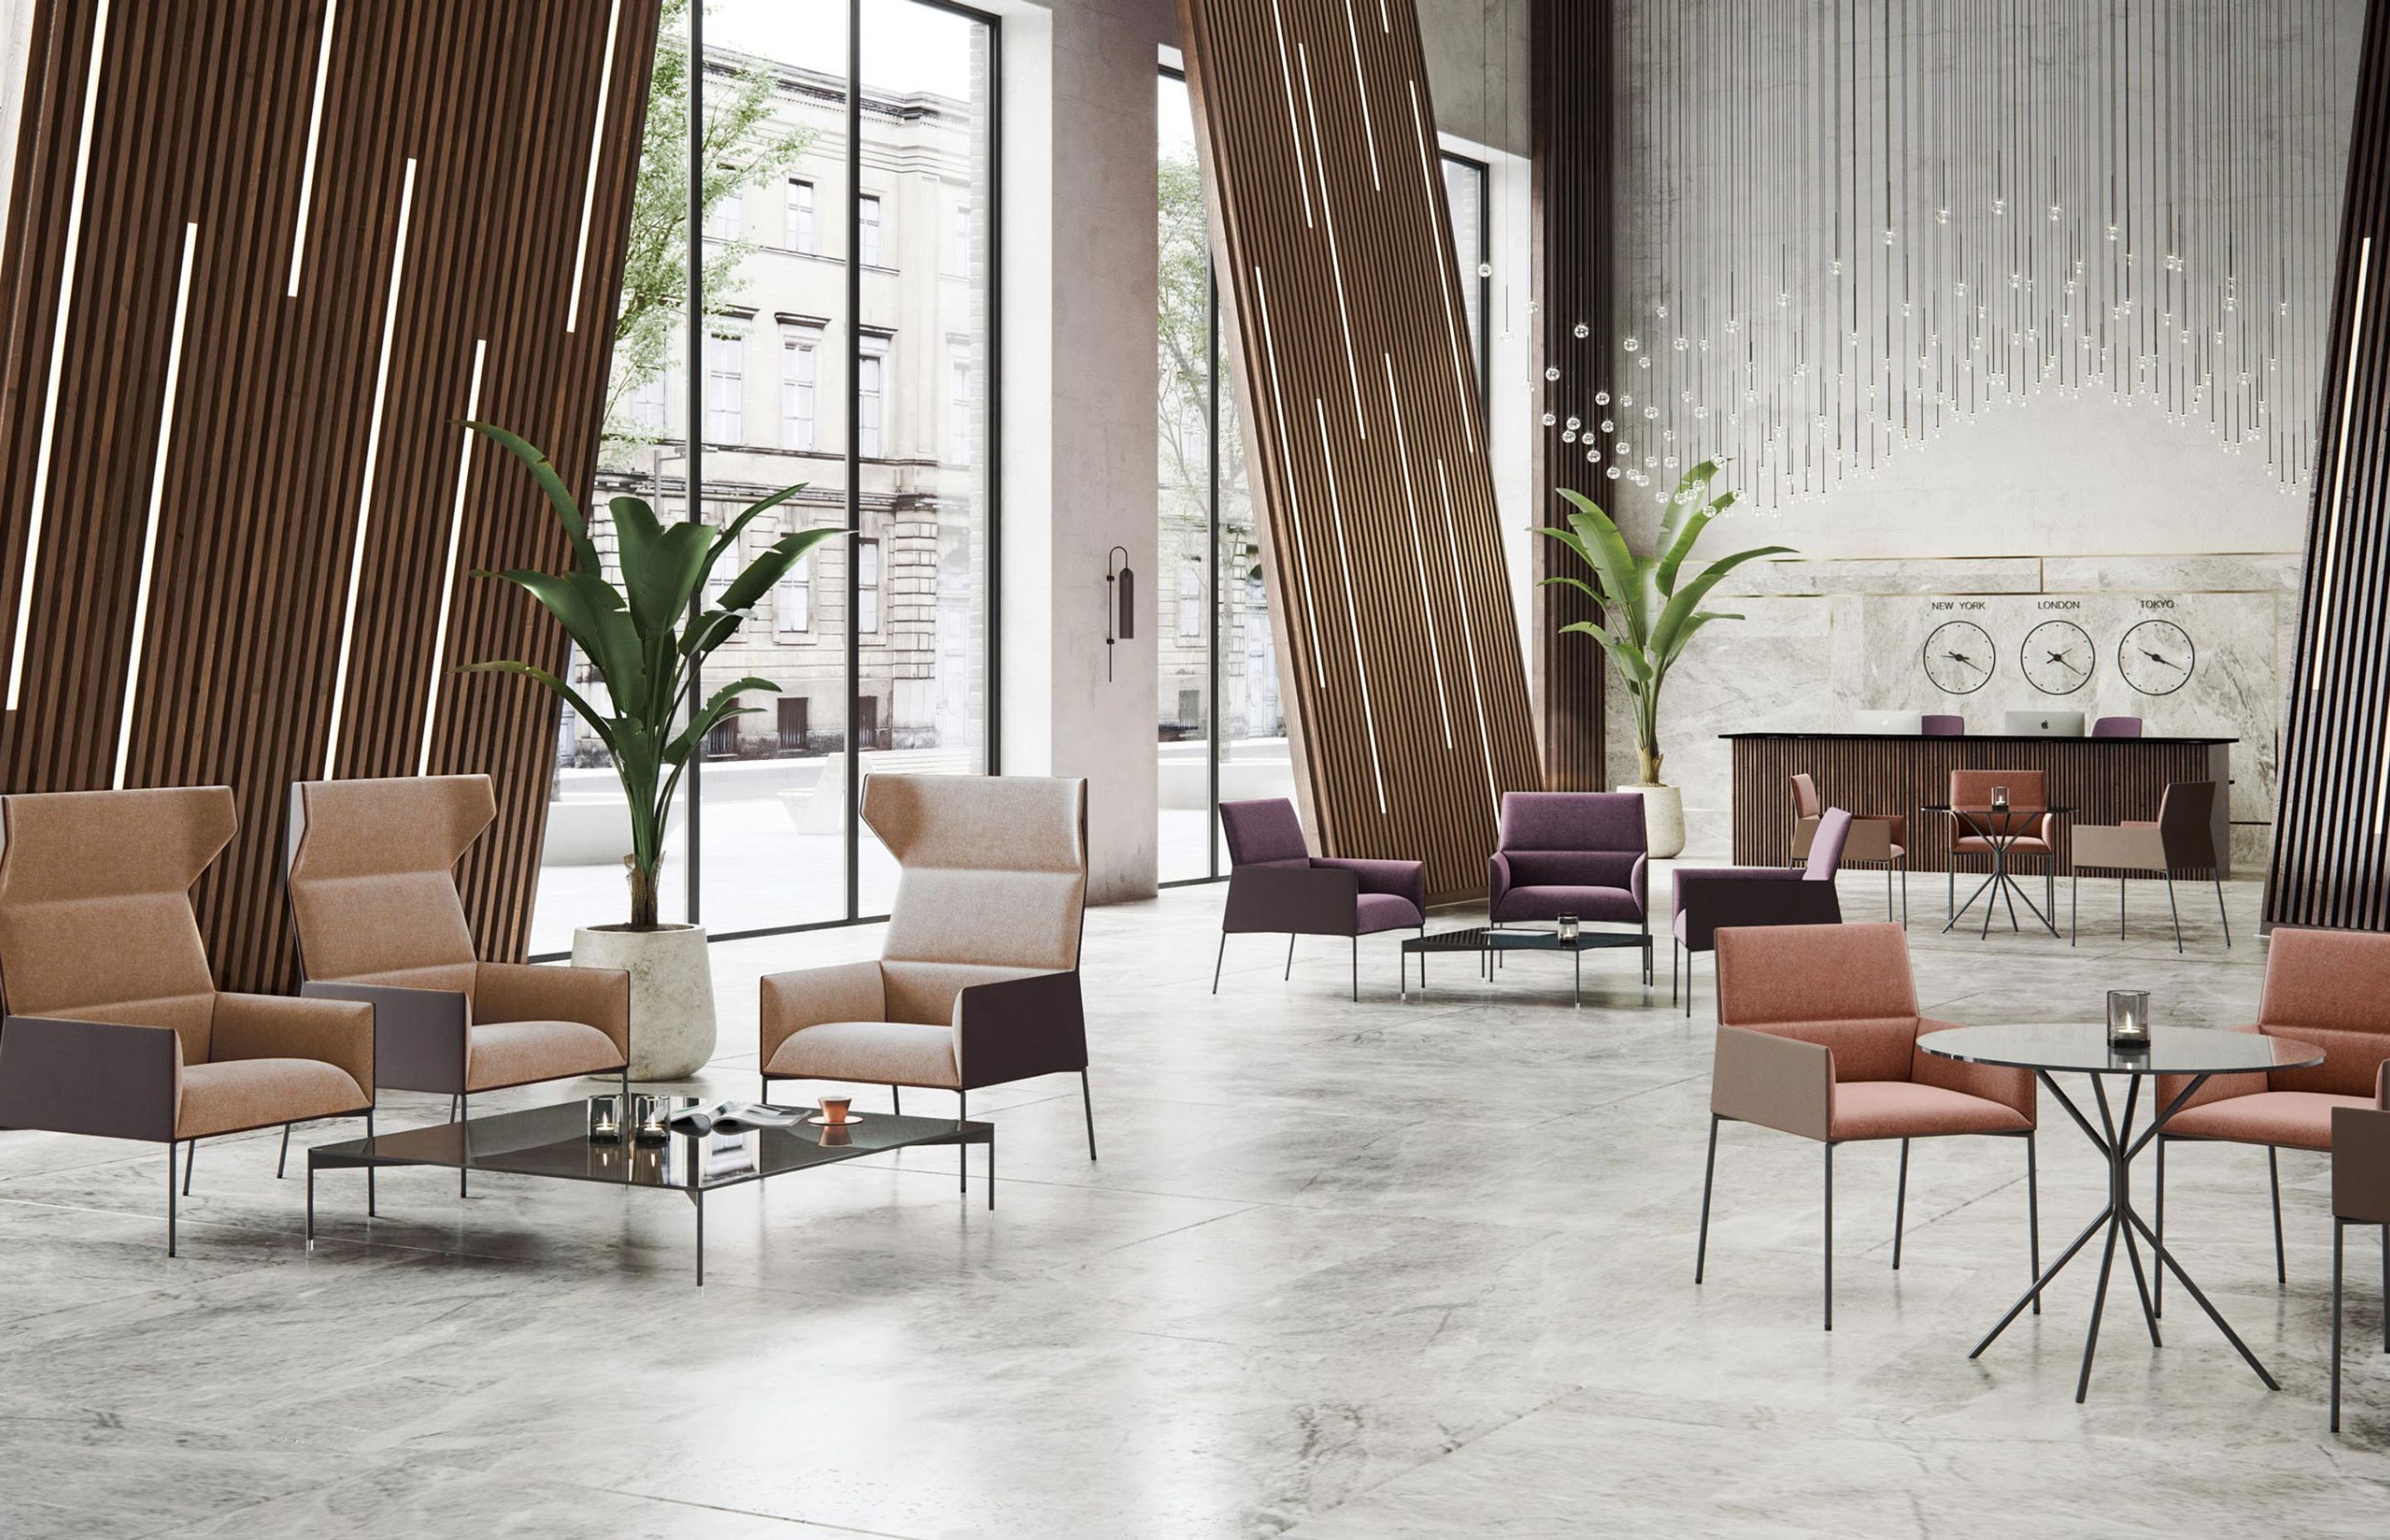 A clean-lined hotel lobby scene, featuring Chic Air chairs